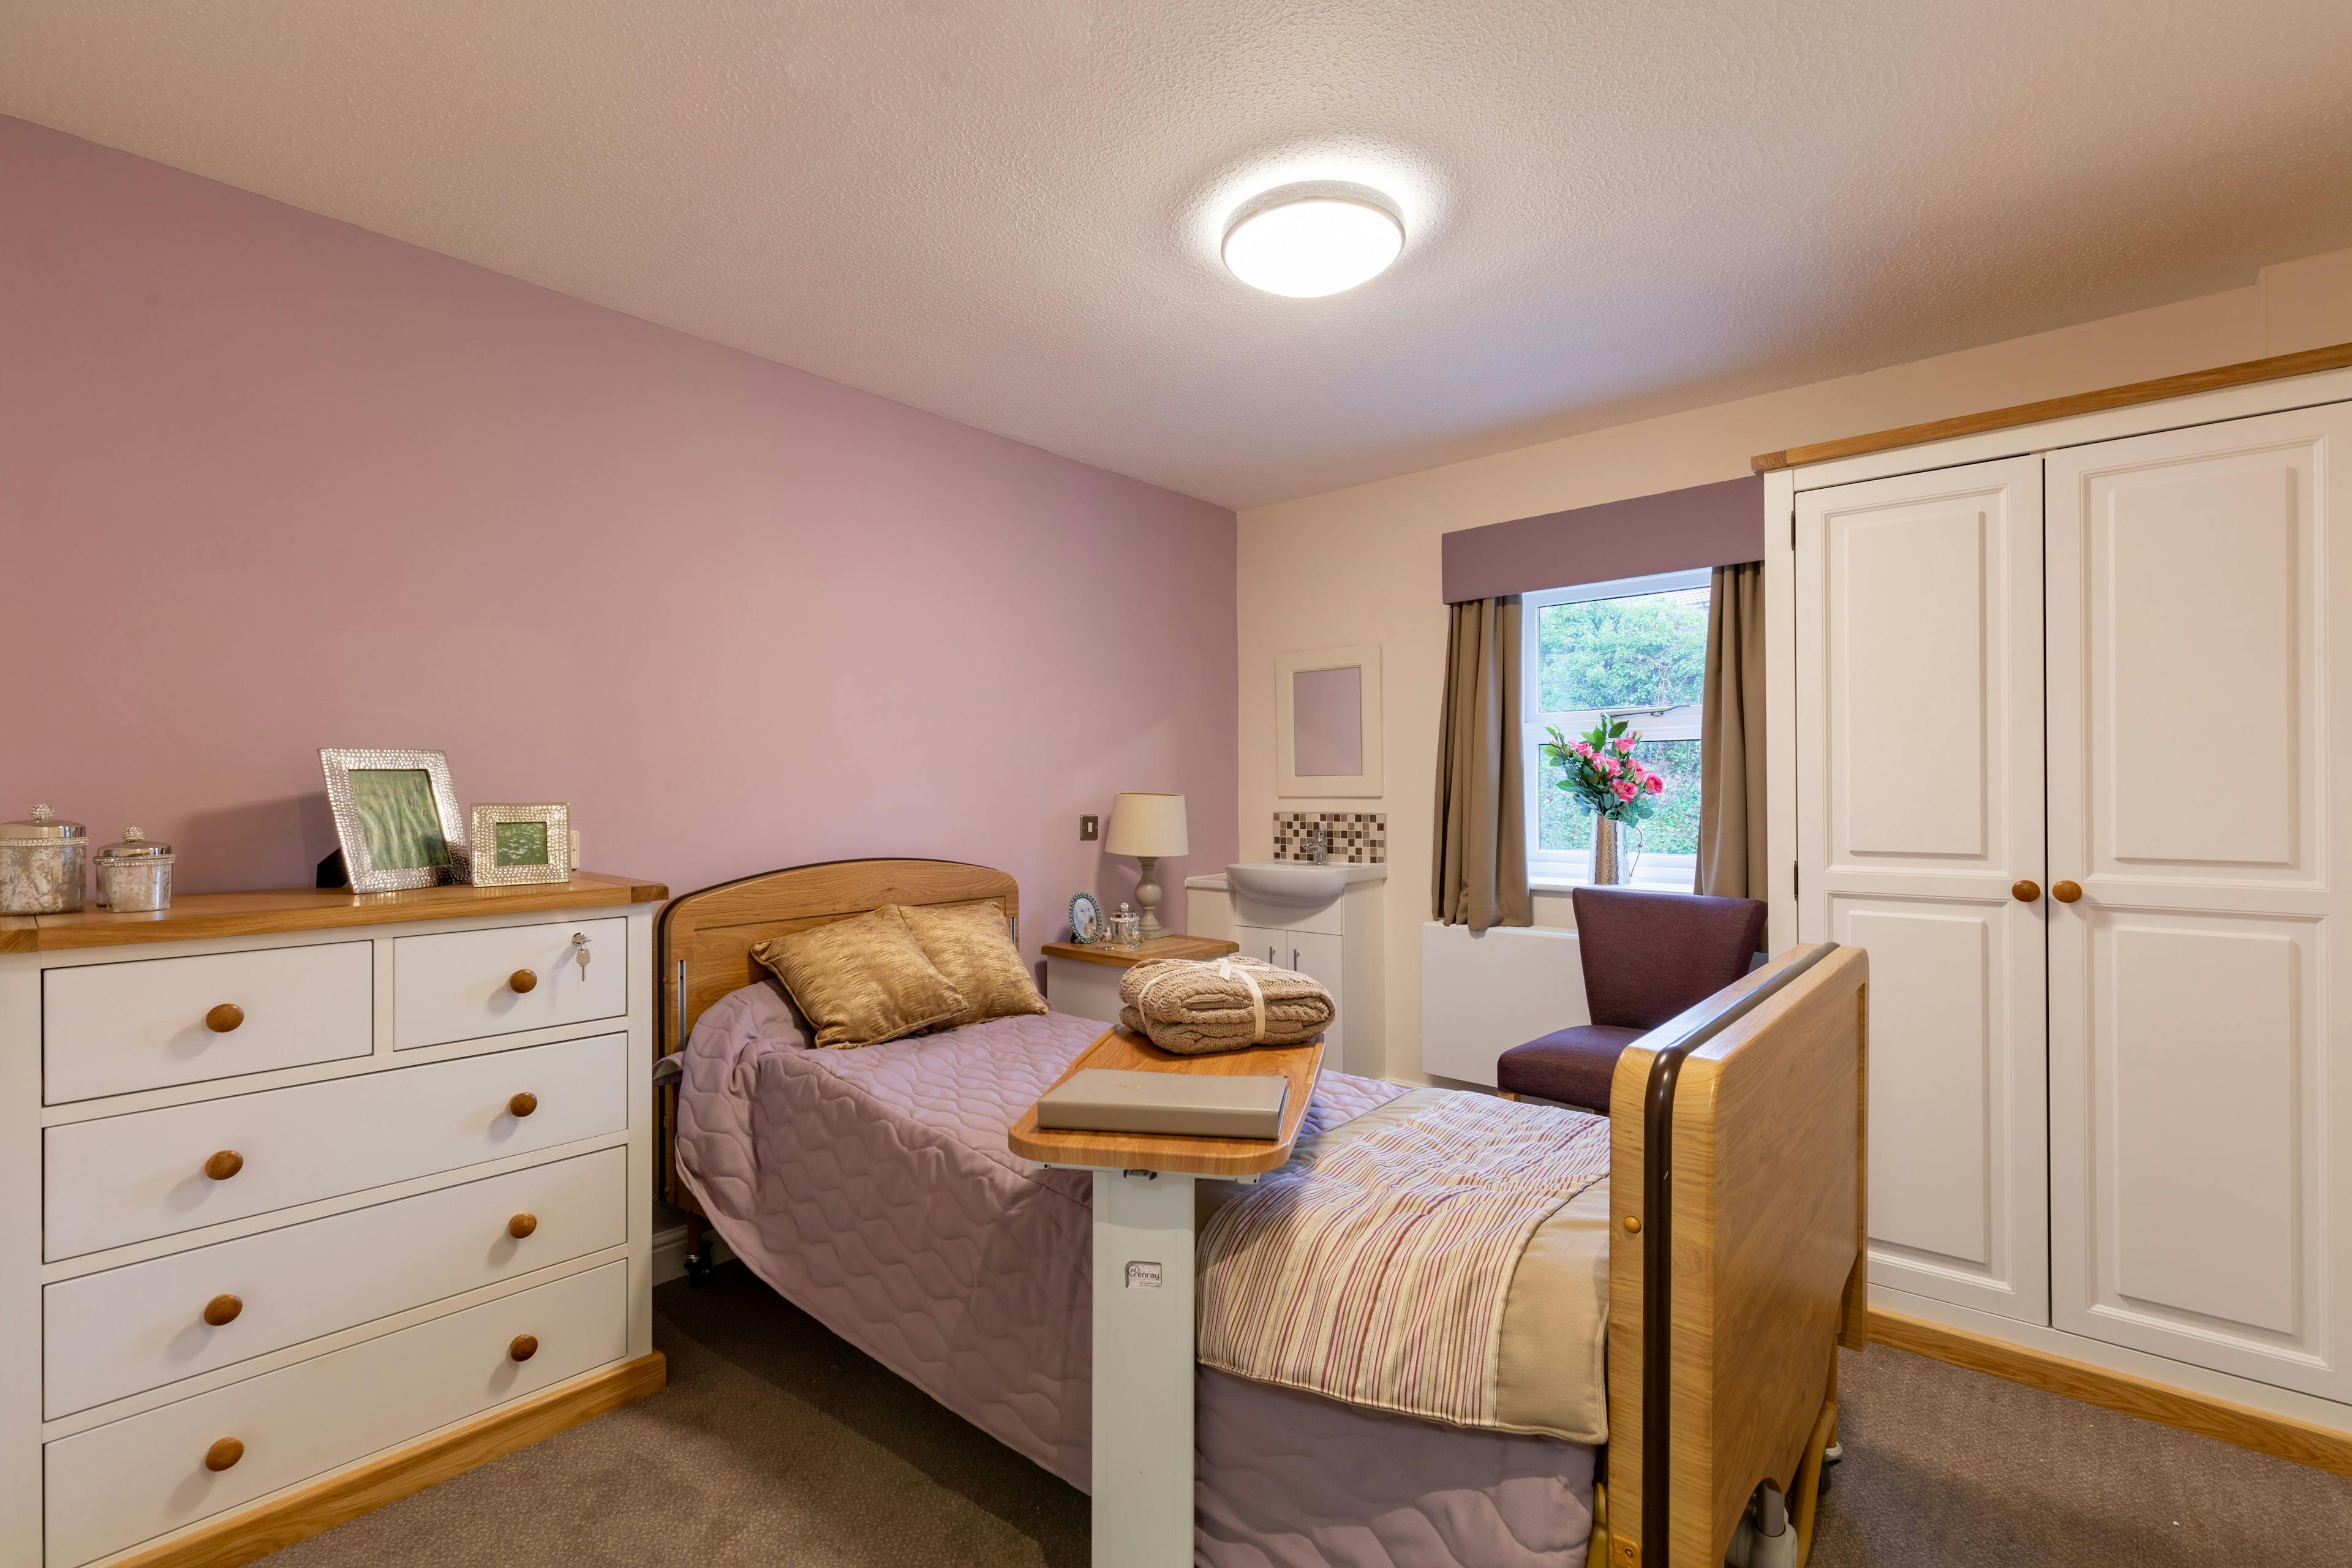 Bedroom at South Chowdene Care Home in Gateshead, Tyne and Wear